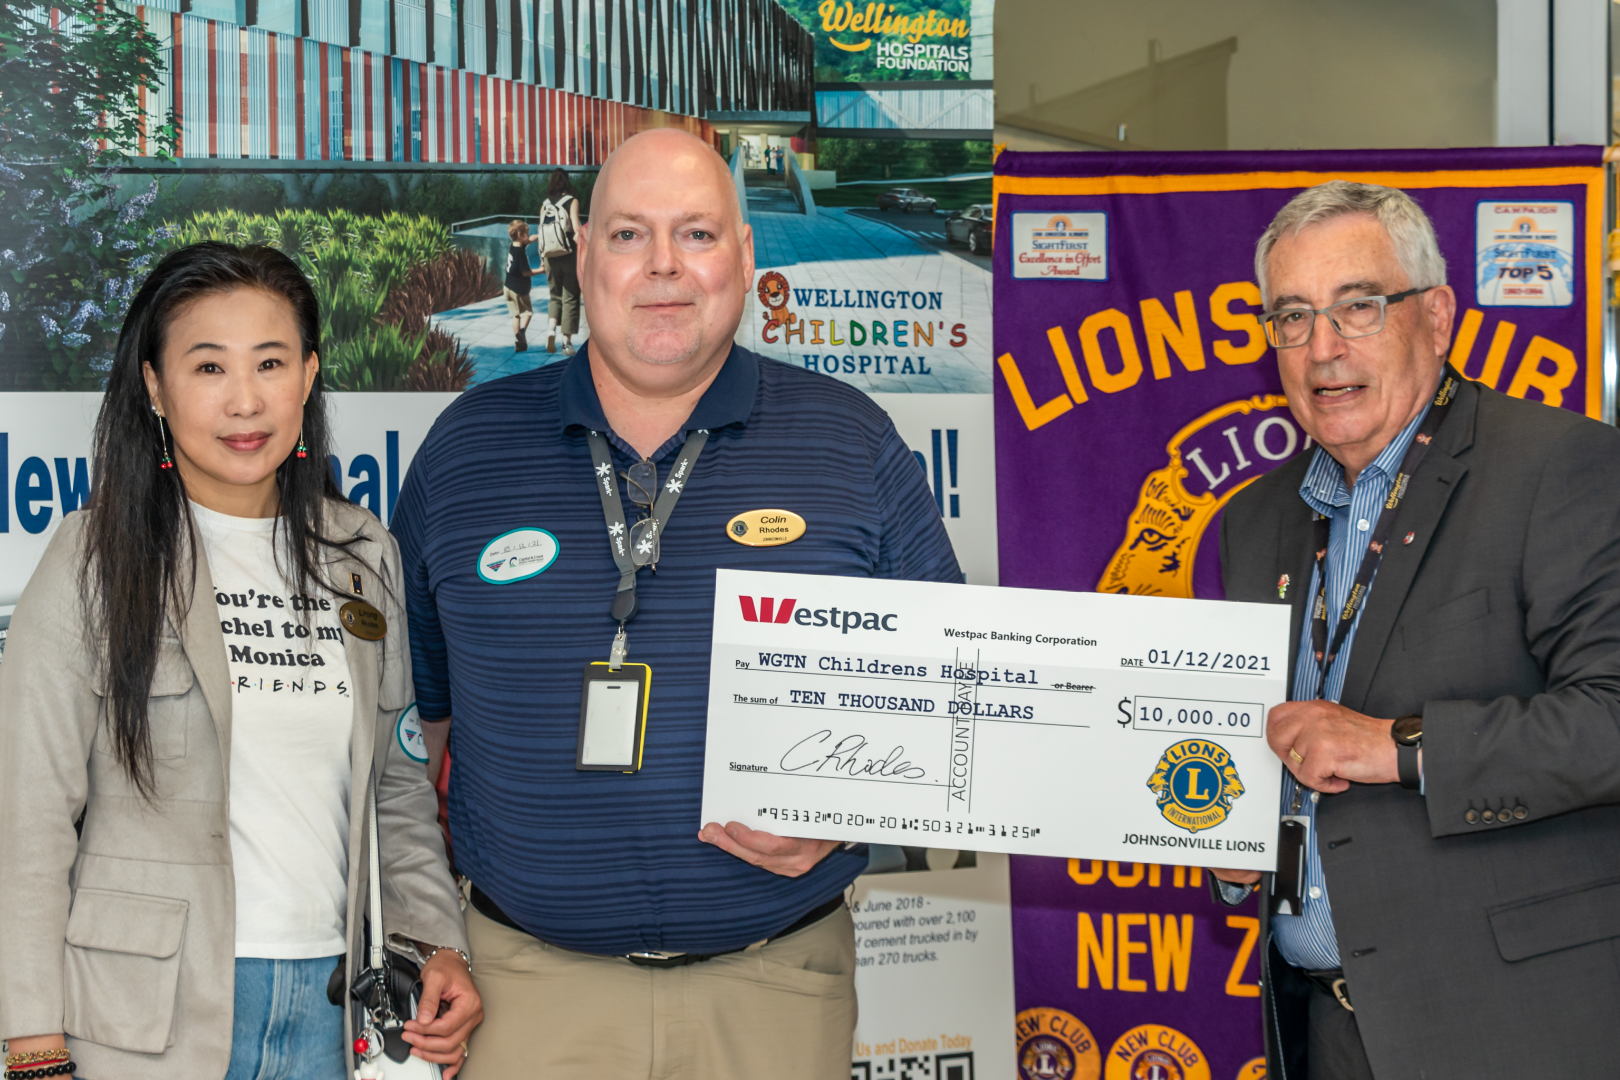 Johnsonville Lions Supreme Top club Service Project Lions Award.png